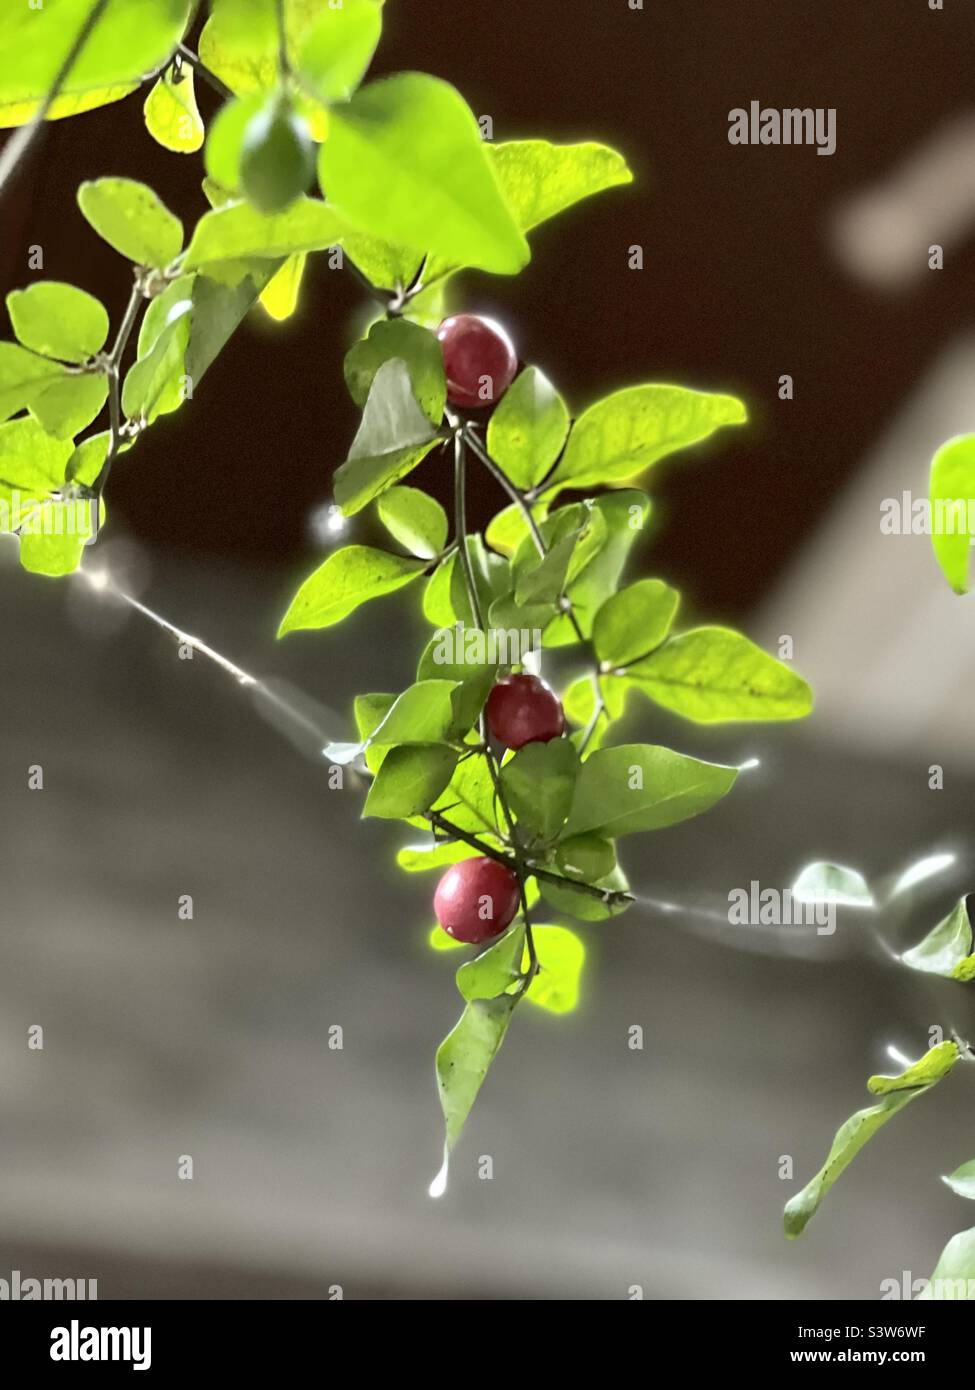 Lime berry tree with its red fruits glistens like a Christmas tree. A sight that touches the heart with the joy and warmth that Christmas brings. The sparks of light brighten up like precious jewels. Stock Photo